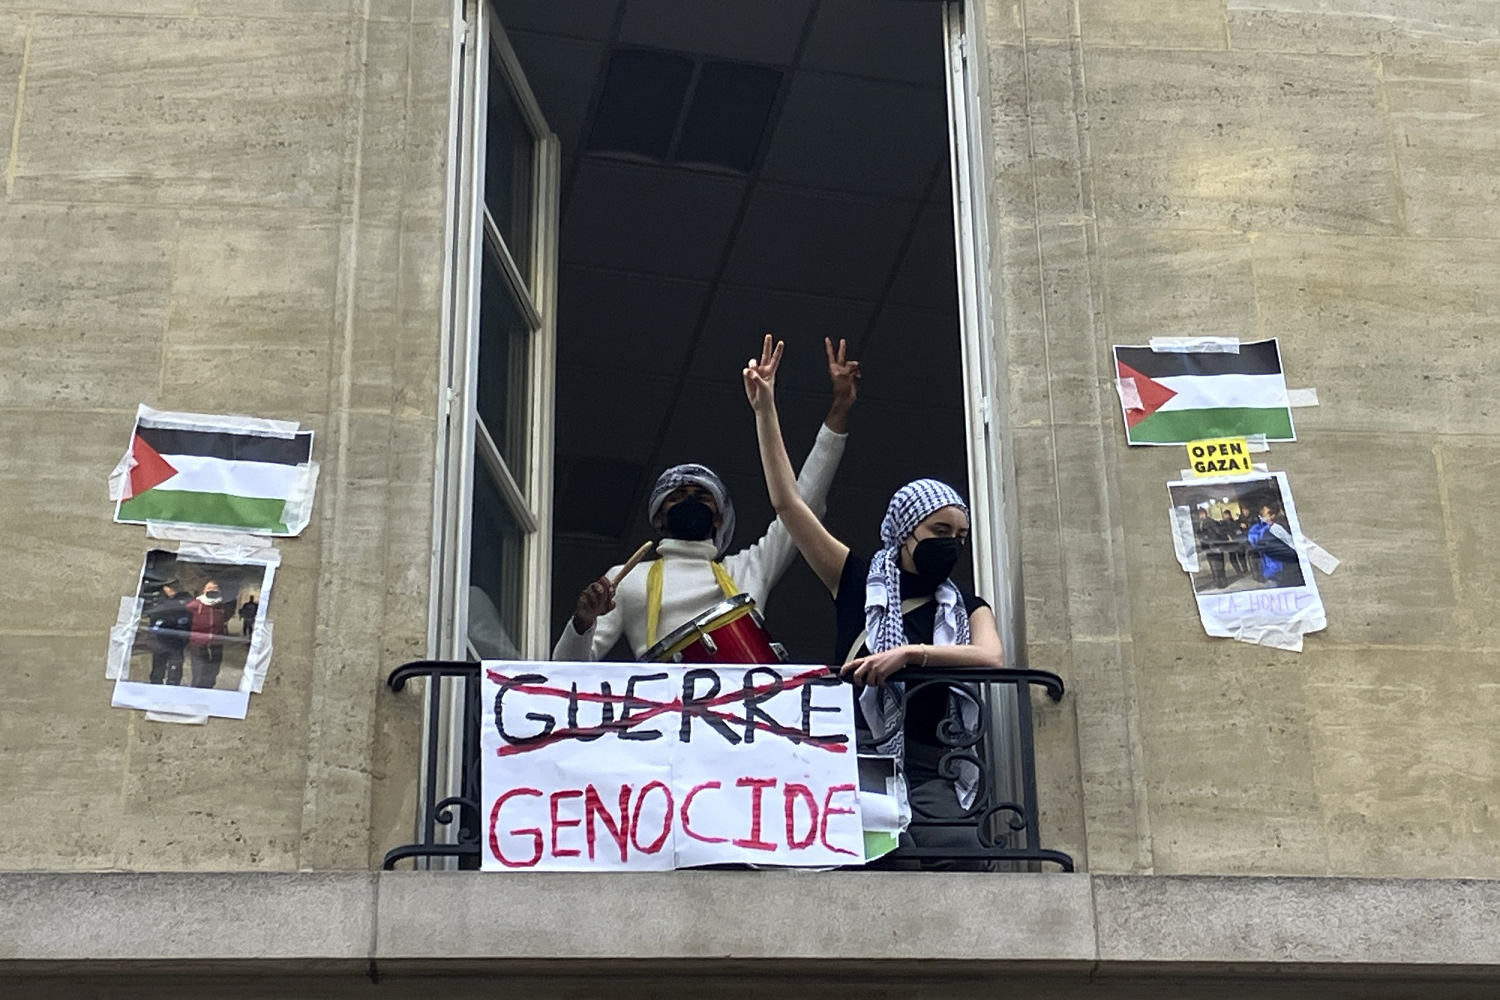 Students resume pro-Palestinian protests at a prestigious Paris university after police intervention